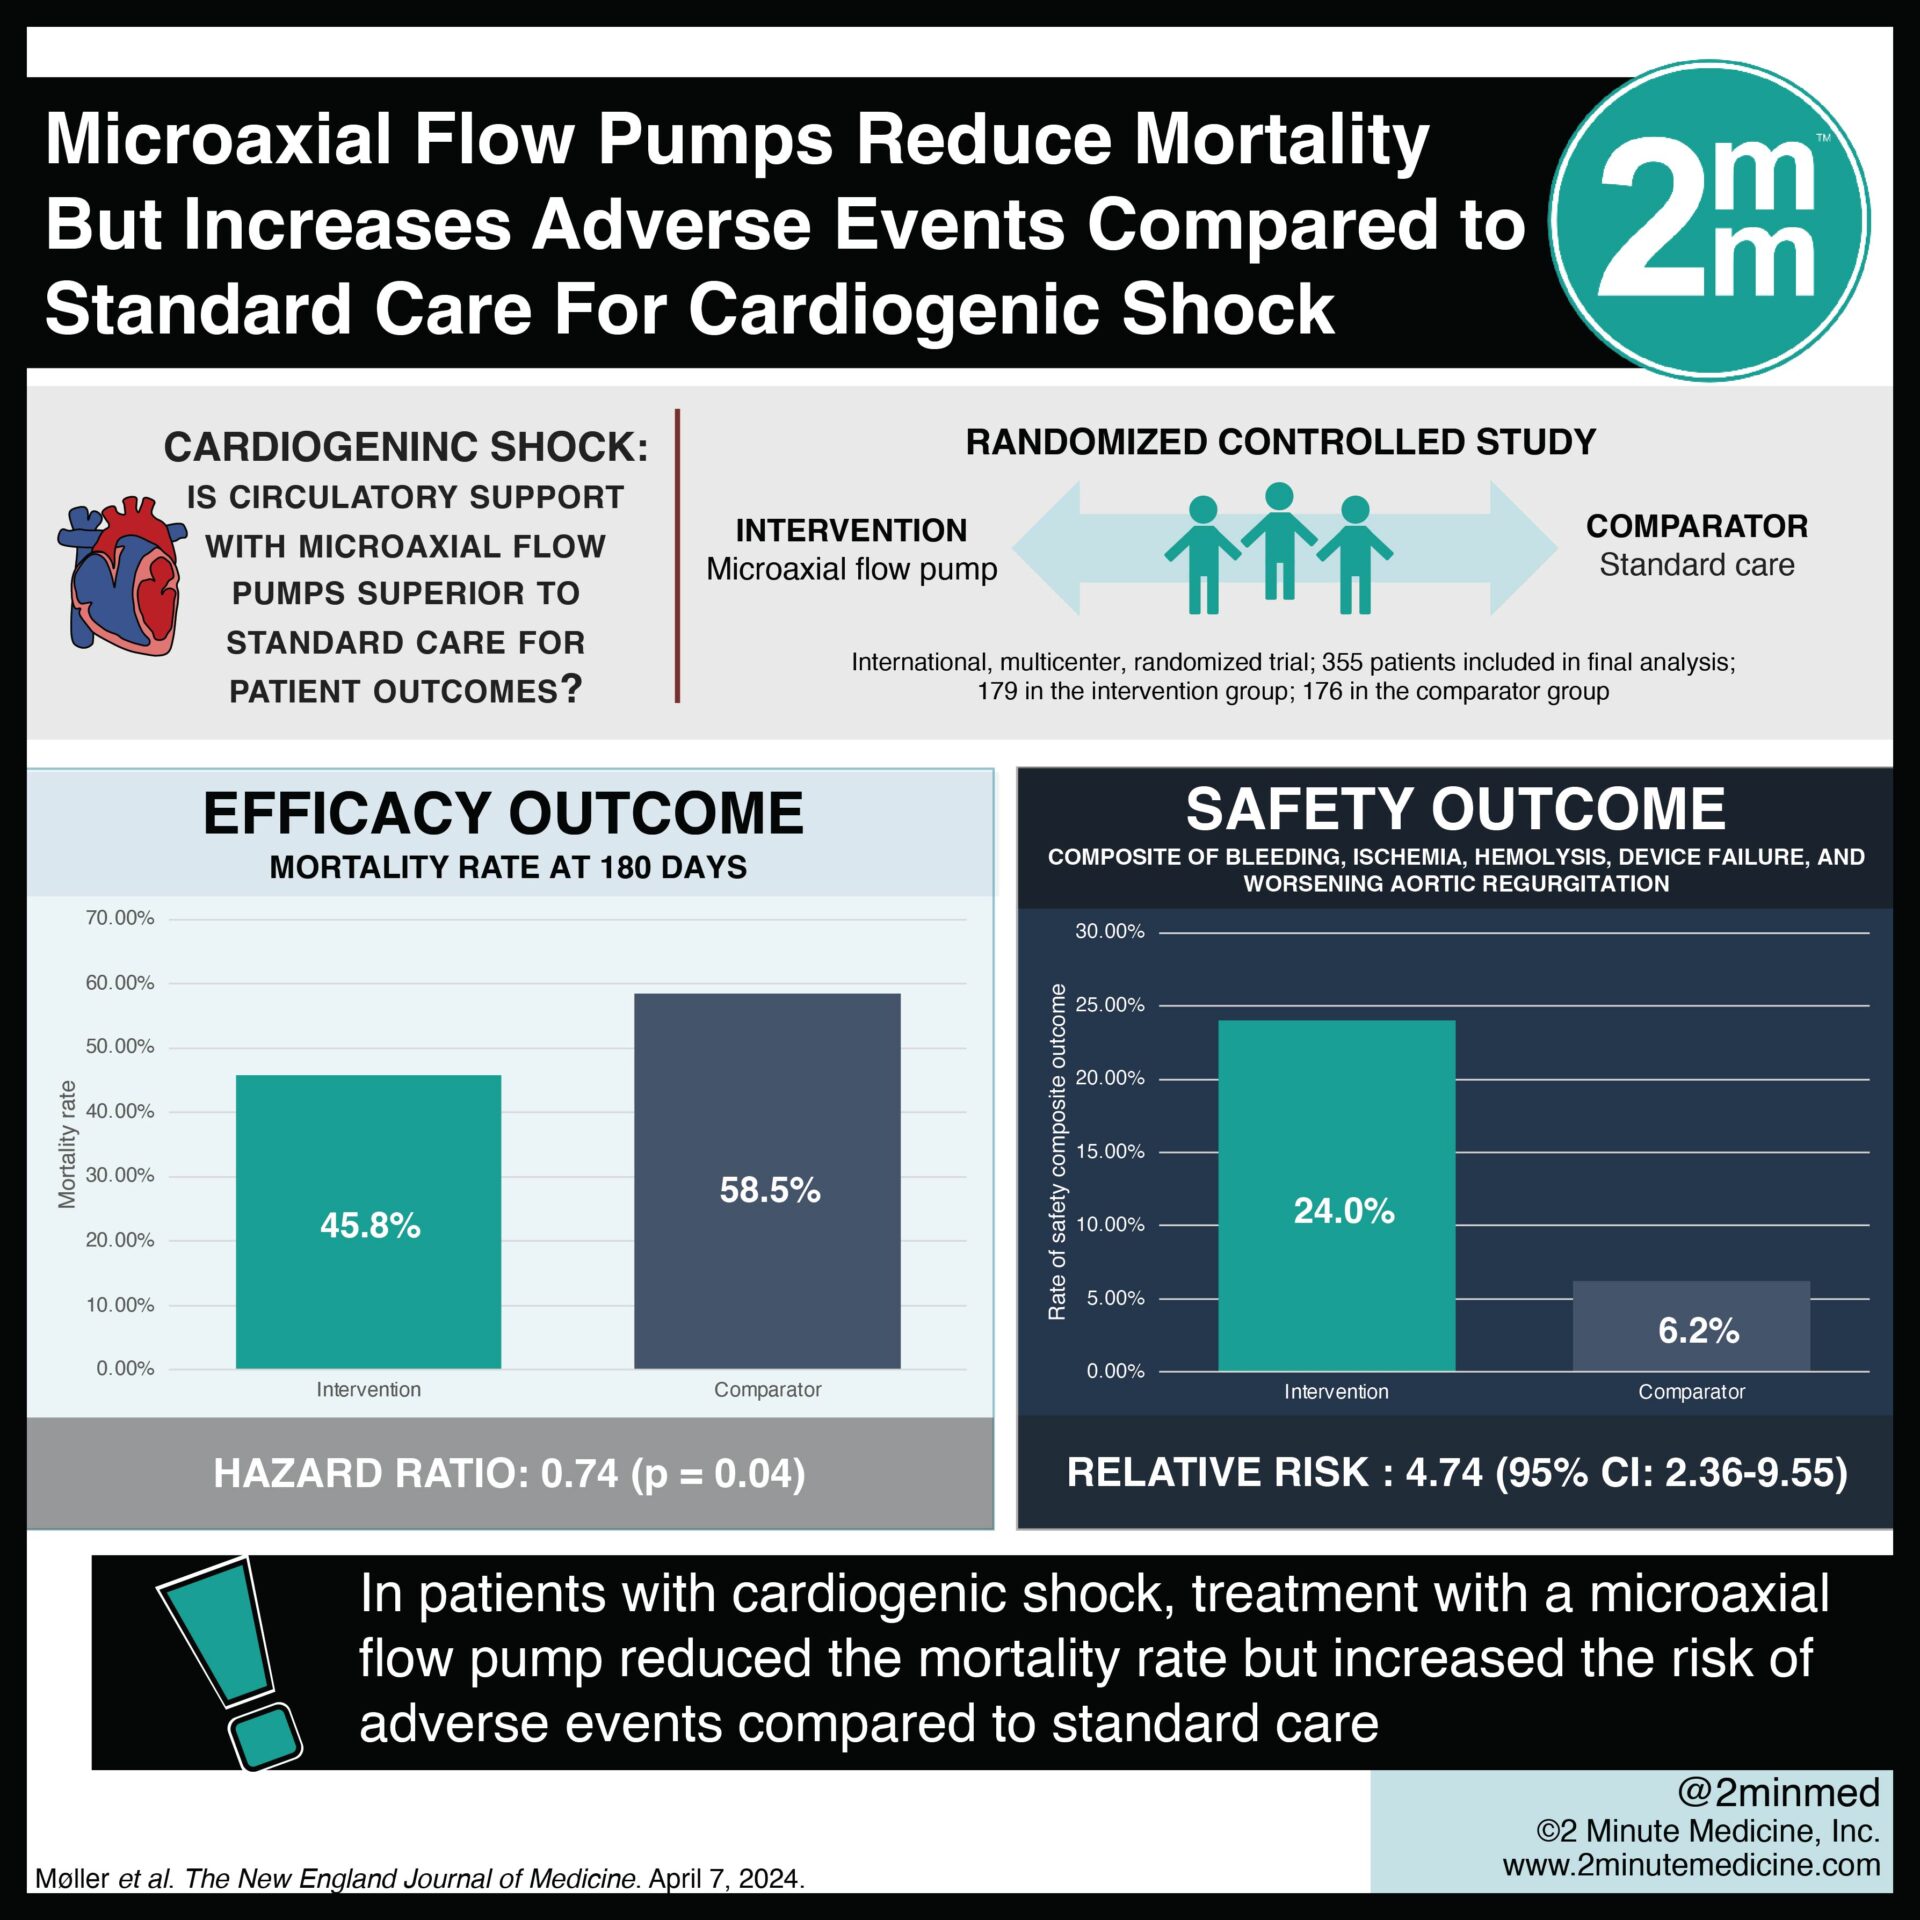 #VisualAbstract: Microaxial Flow Pumps Reduces Mortality But Increases Adverse Events Compared to Standard Care For Cardiogenic Shock